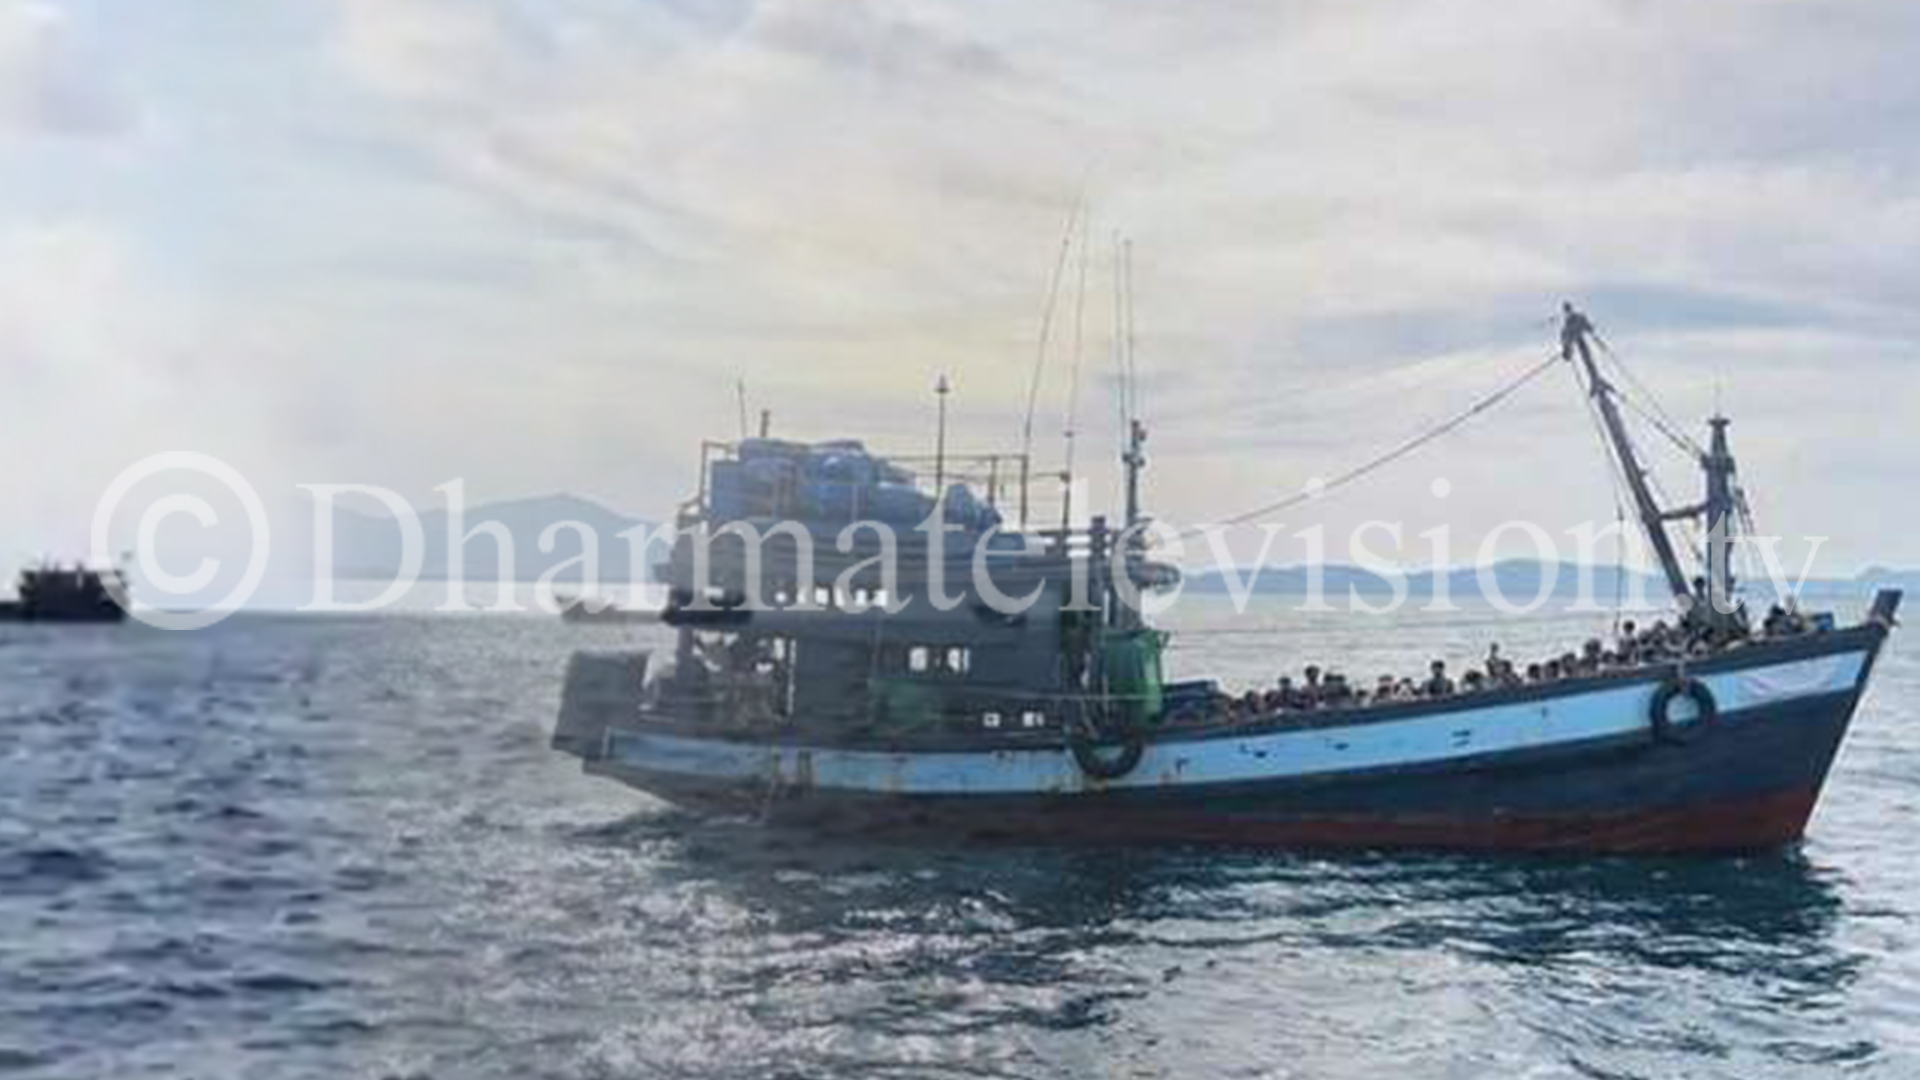 60 Chinese arrested for trespassing into Malaysian territorial waters